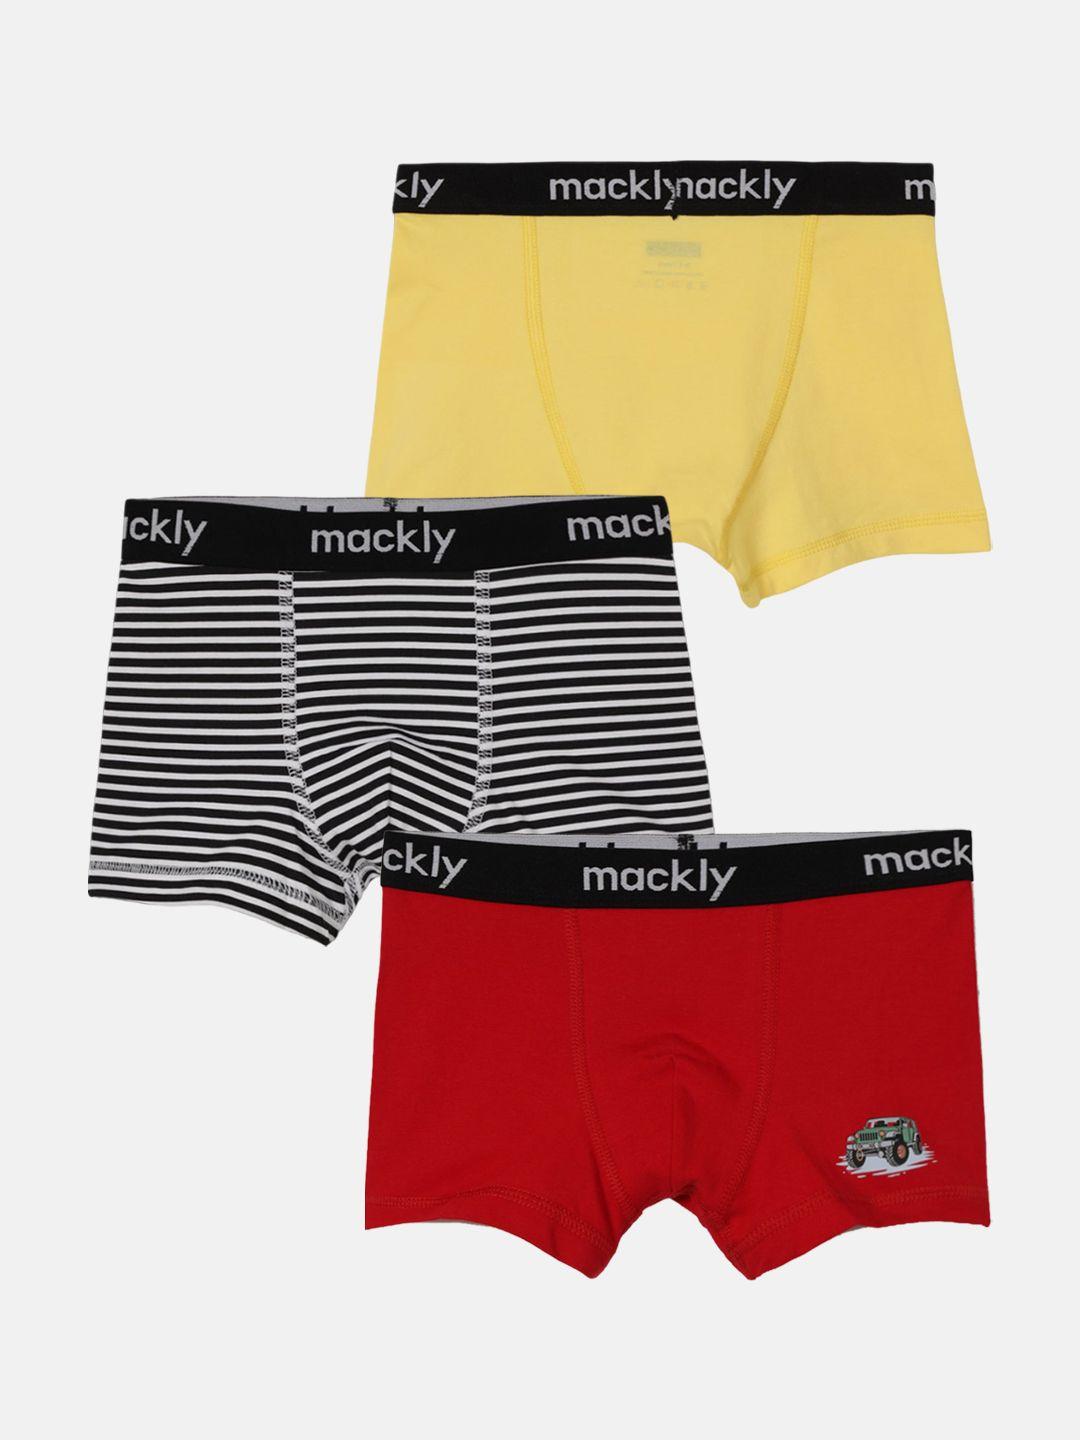 mackly boys pack of 3 assorted cotton trunks